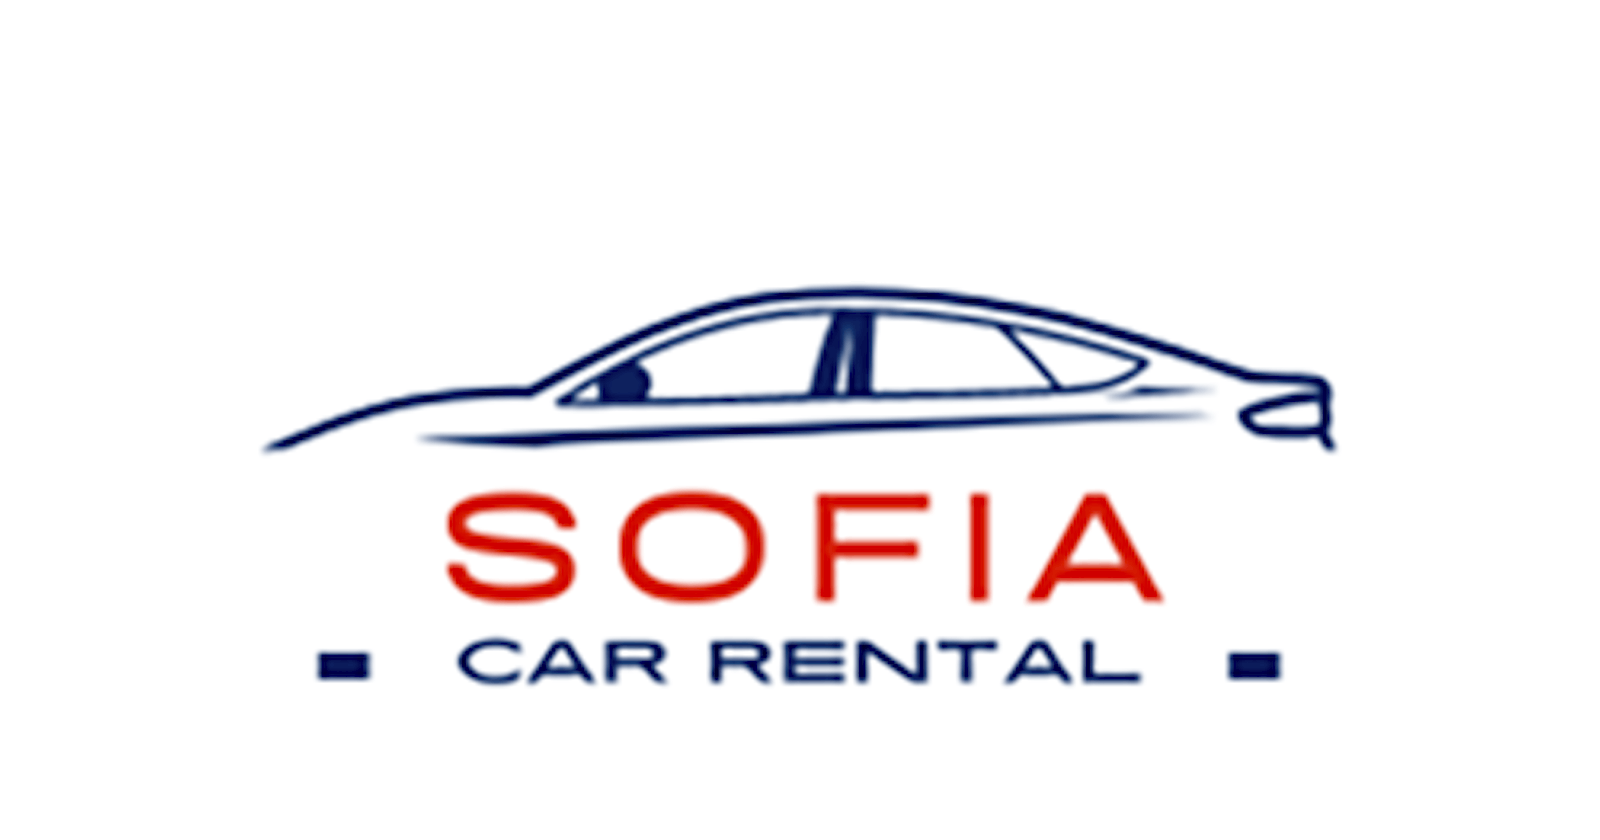 Reasons to Consider Renting a Car in Sofia